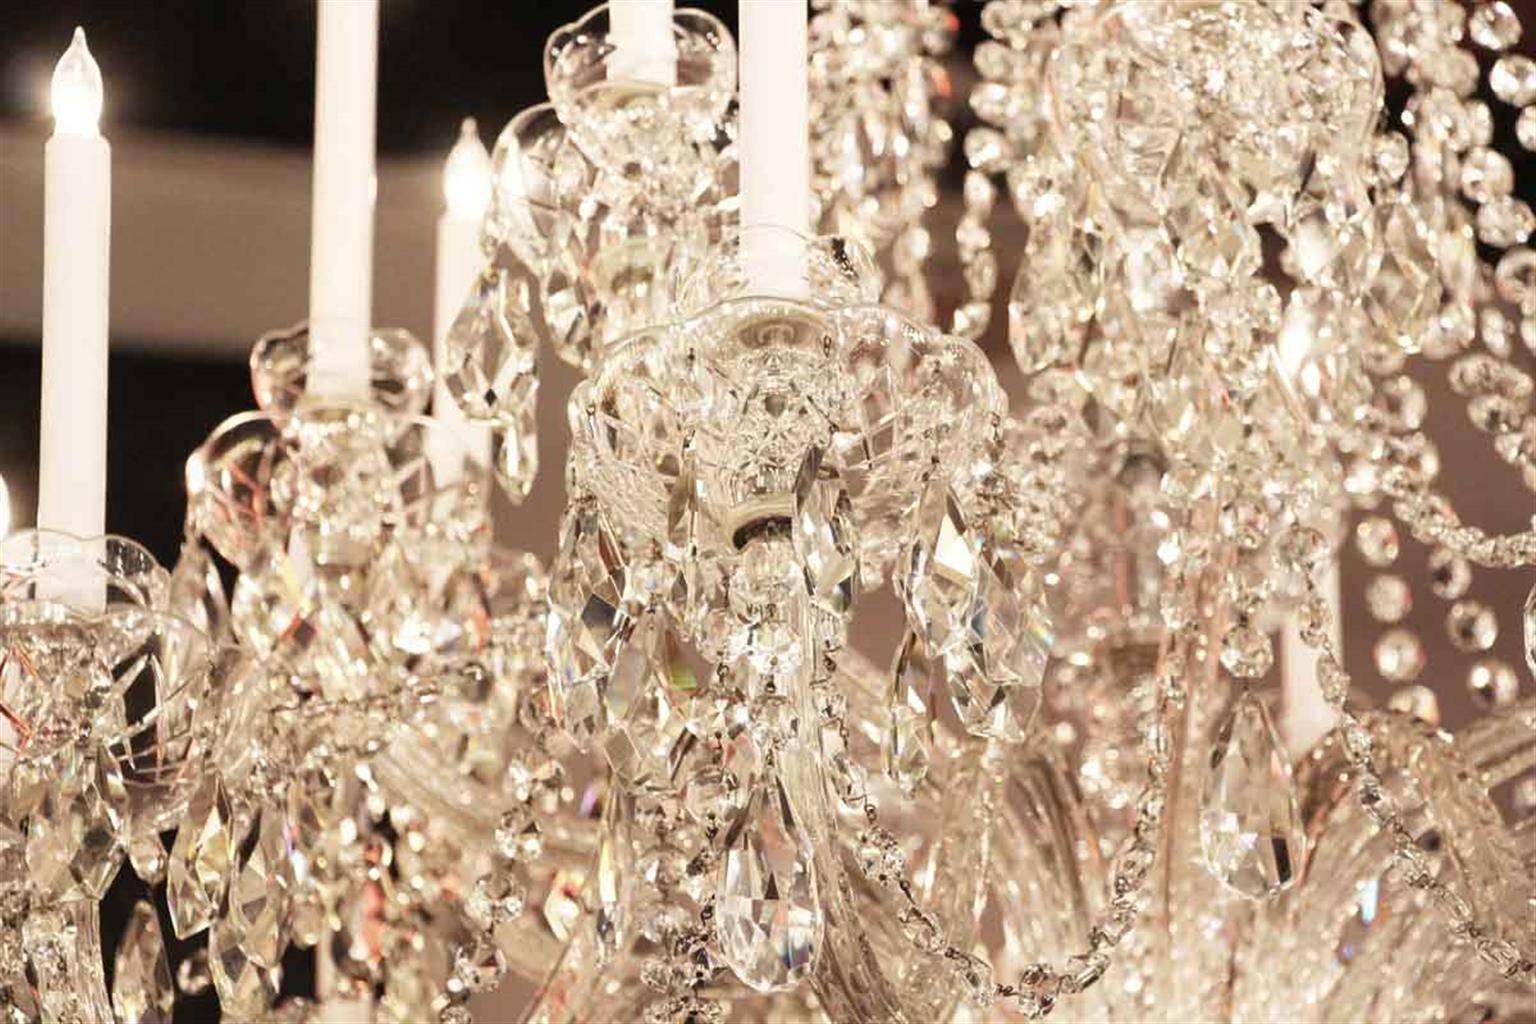 Mid-20th Century 1960s Elegant Large Eighteen-Arm Crystal Chandelier with Draping Crystal Beading